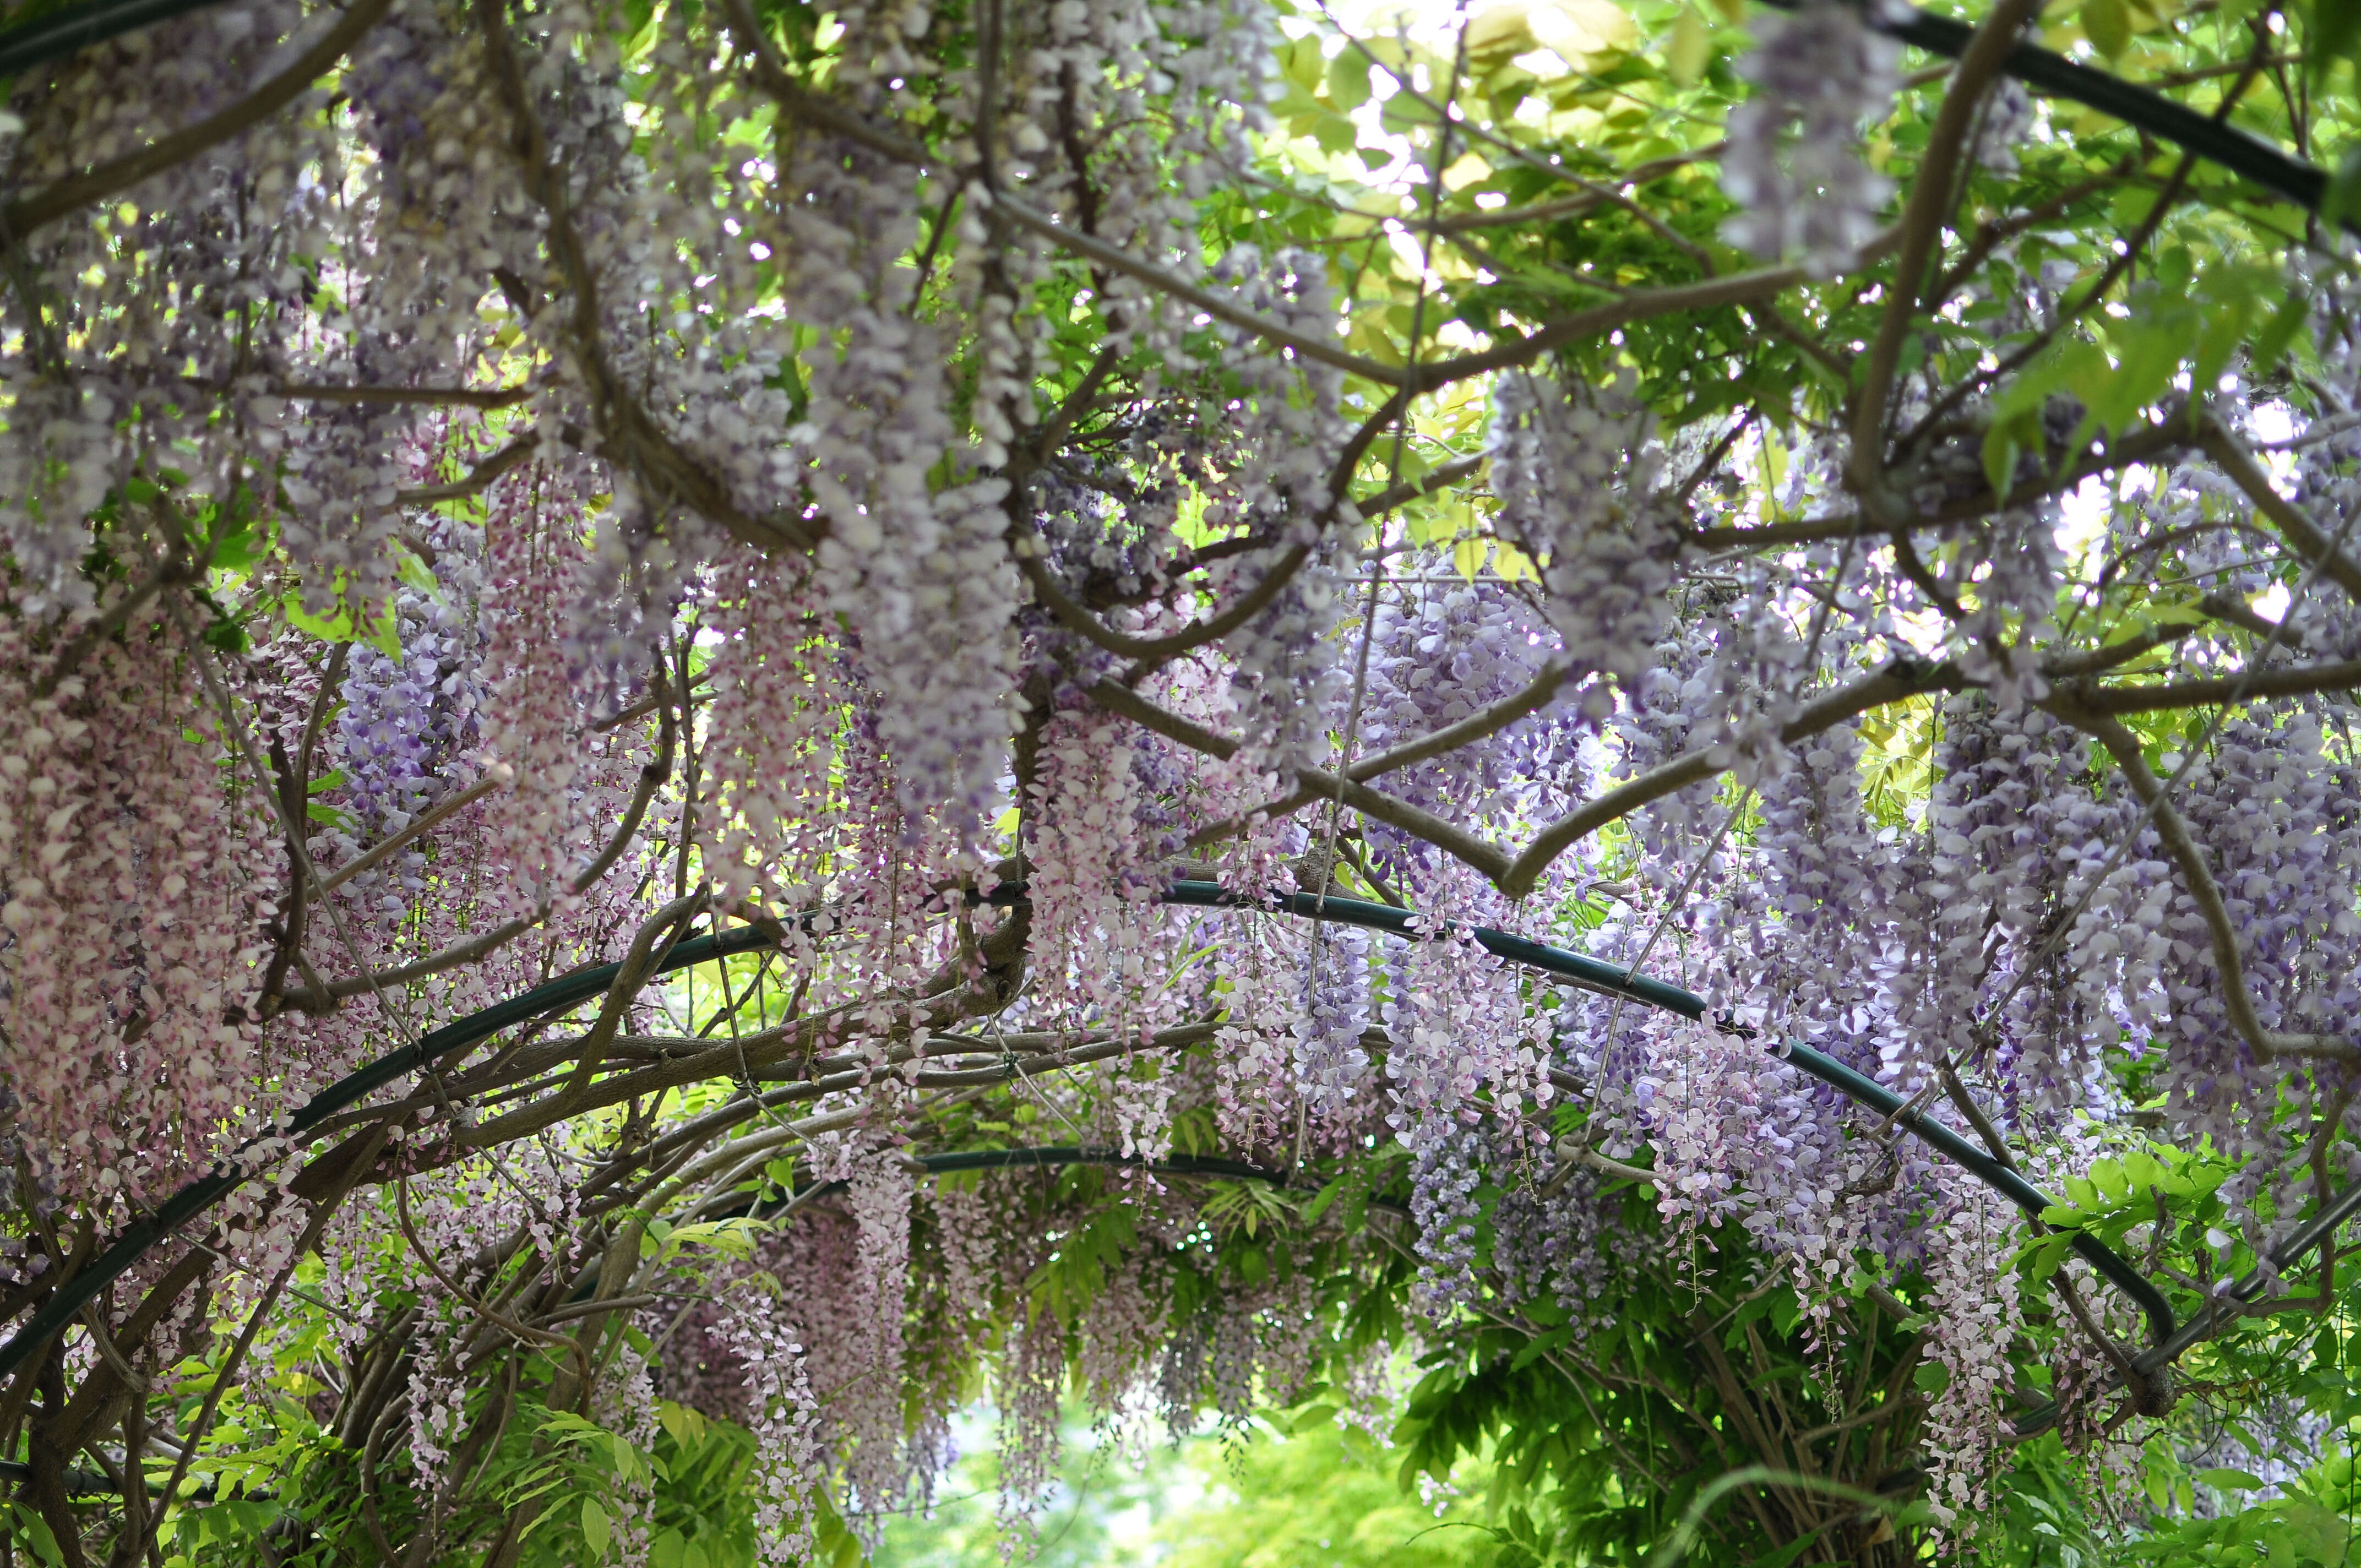 Image of Chinese wisteria